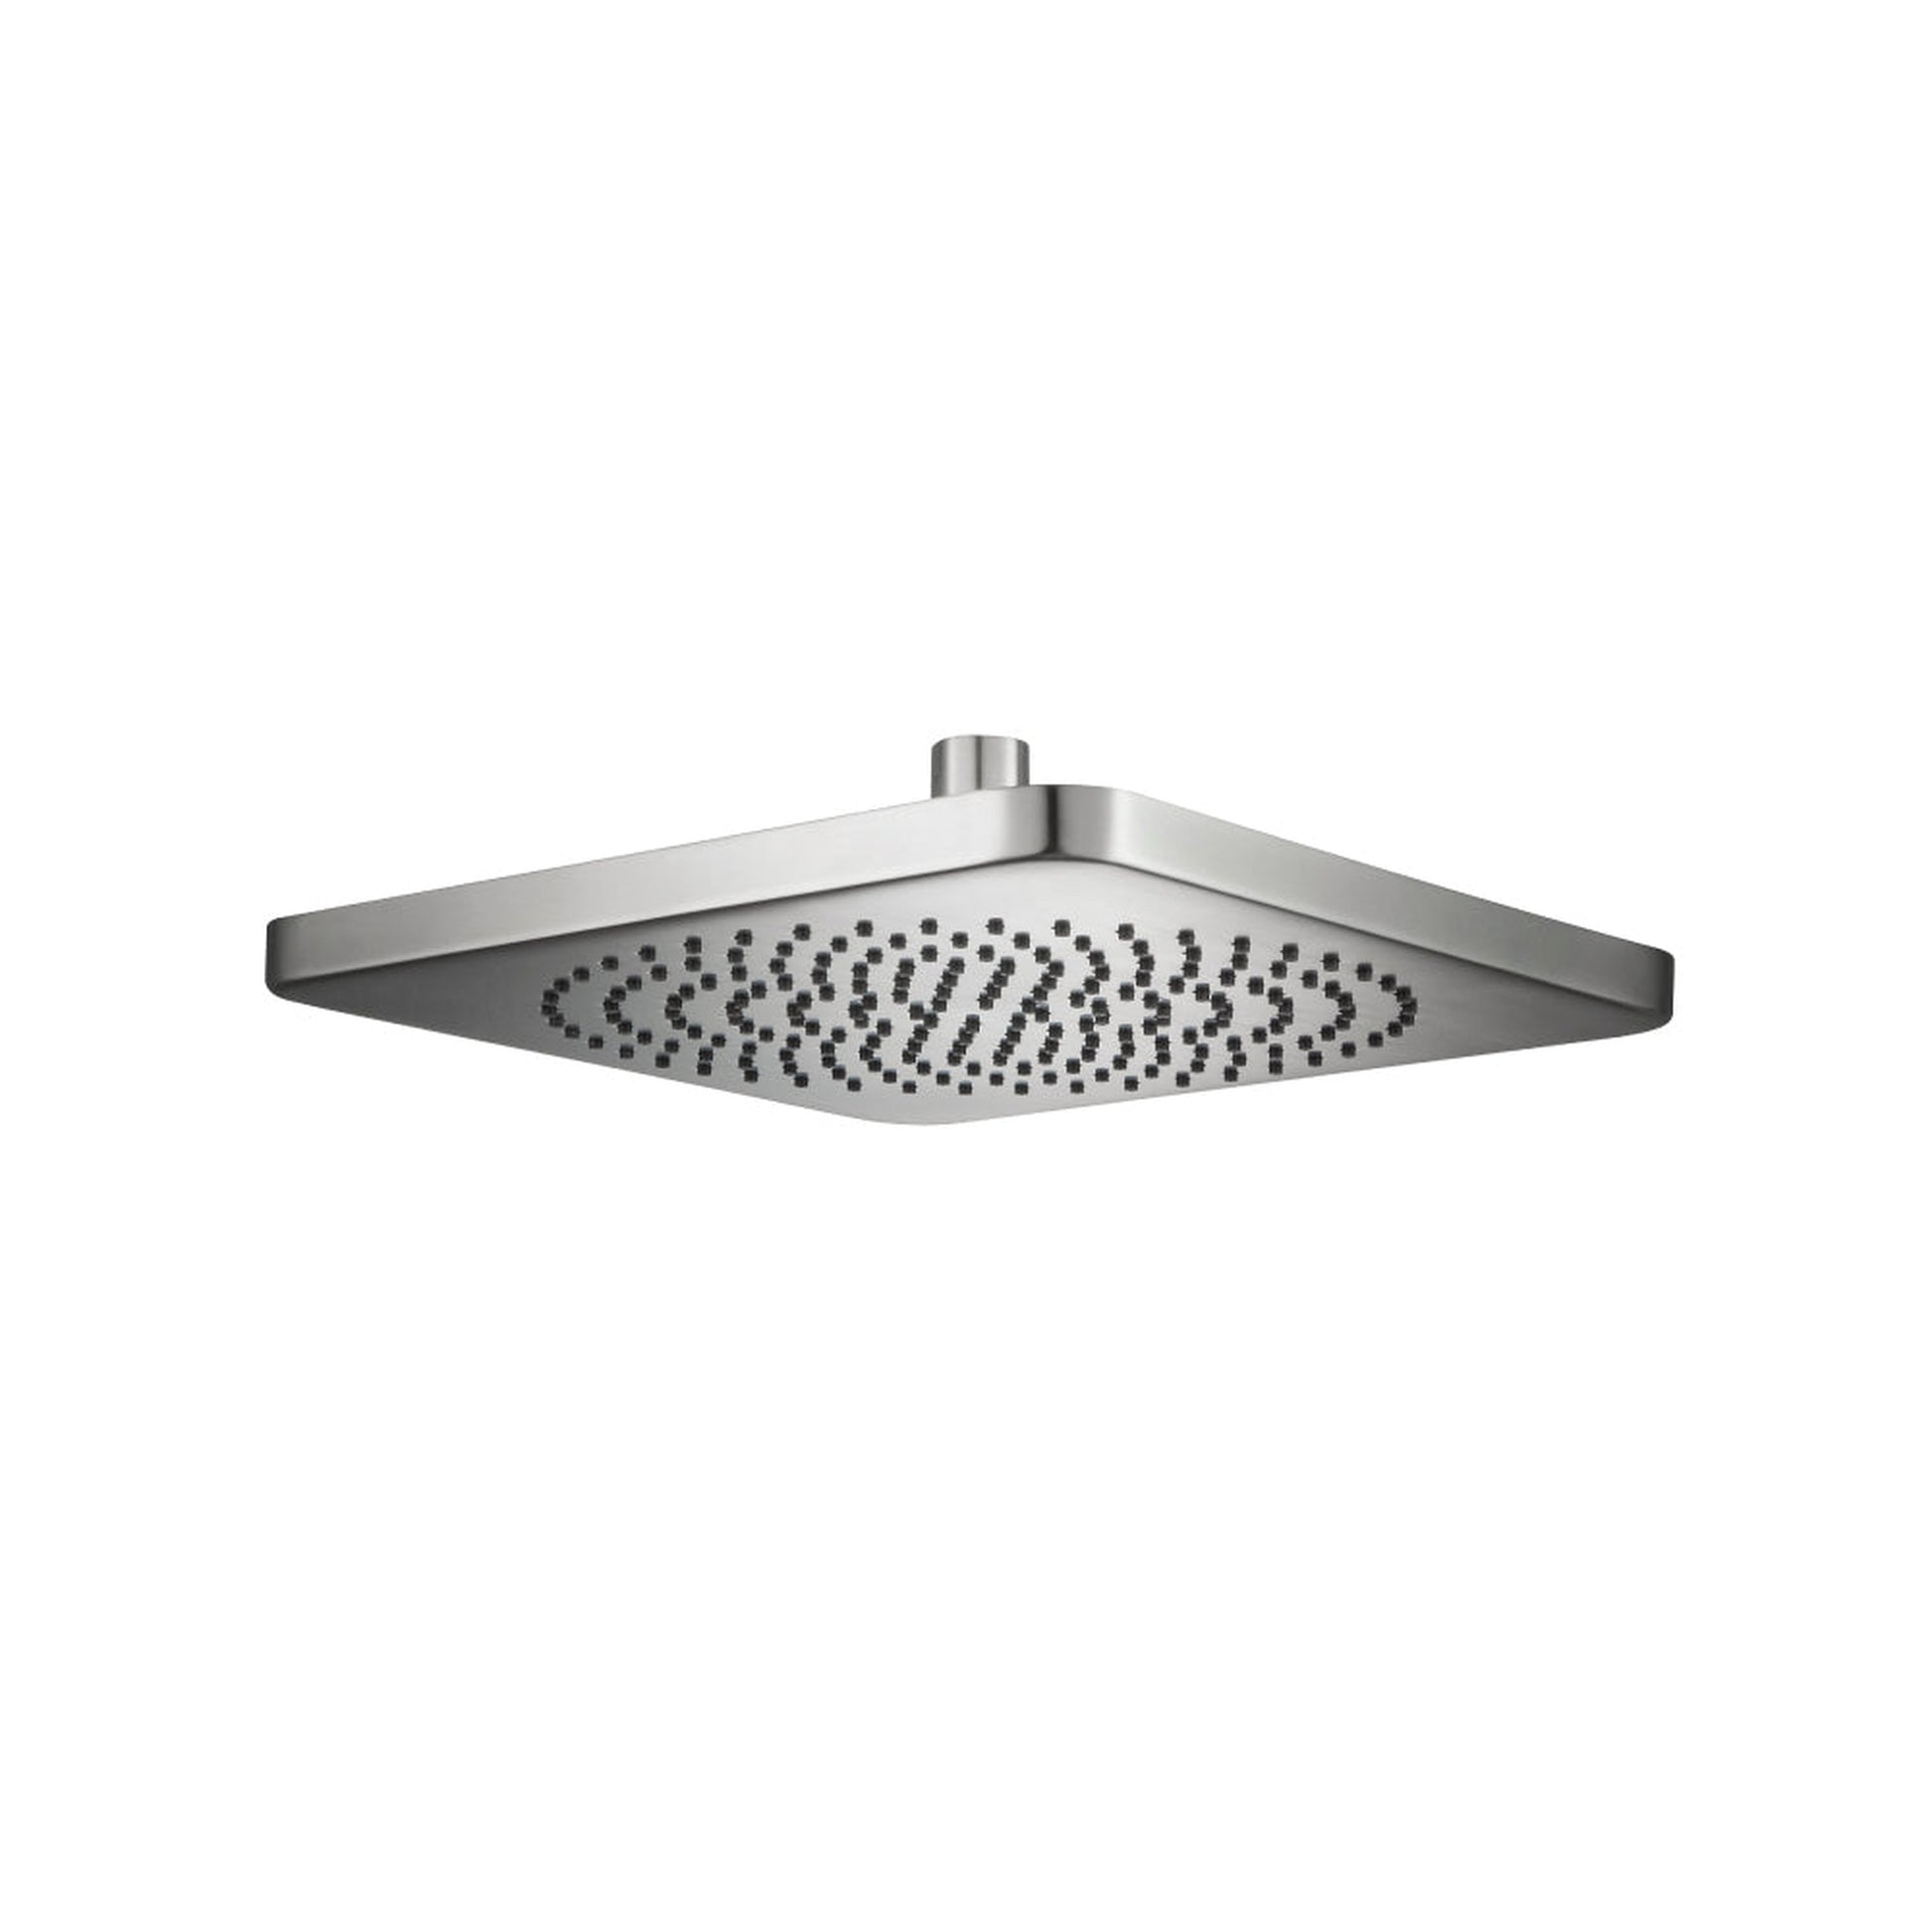 Isenberg Universal Fixtures 10" Single Function Square Curve-Edged Brushed Nickel PVD Solid Brass Rain Shower Head